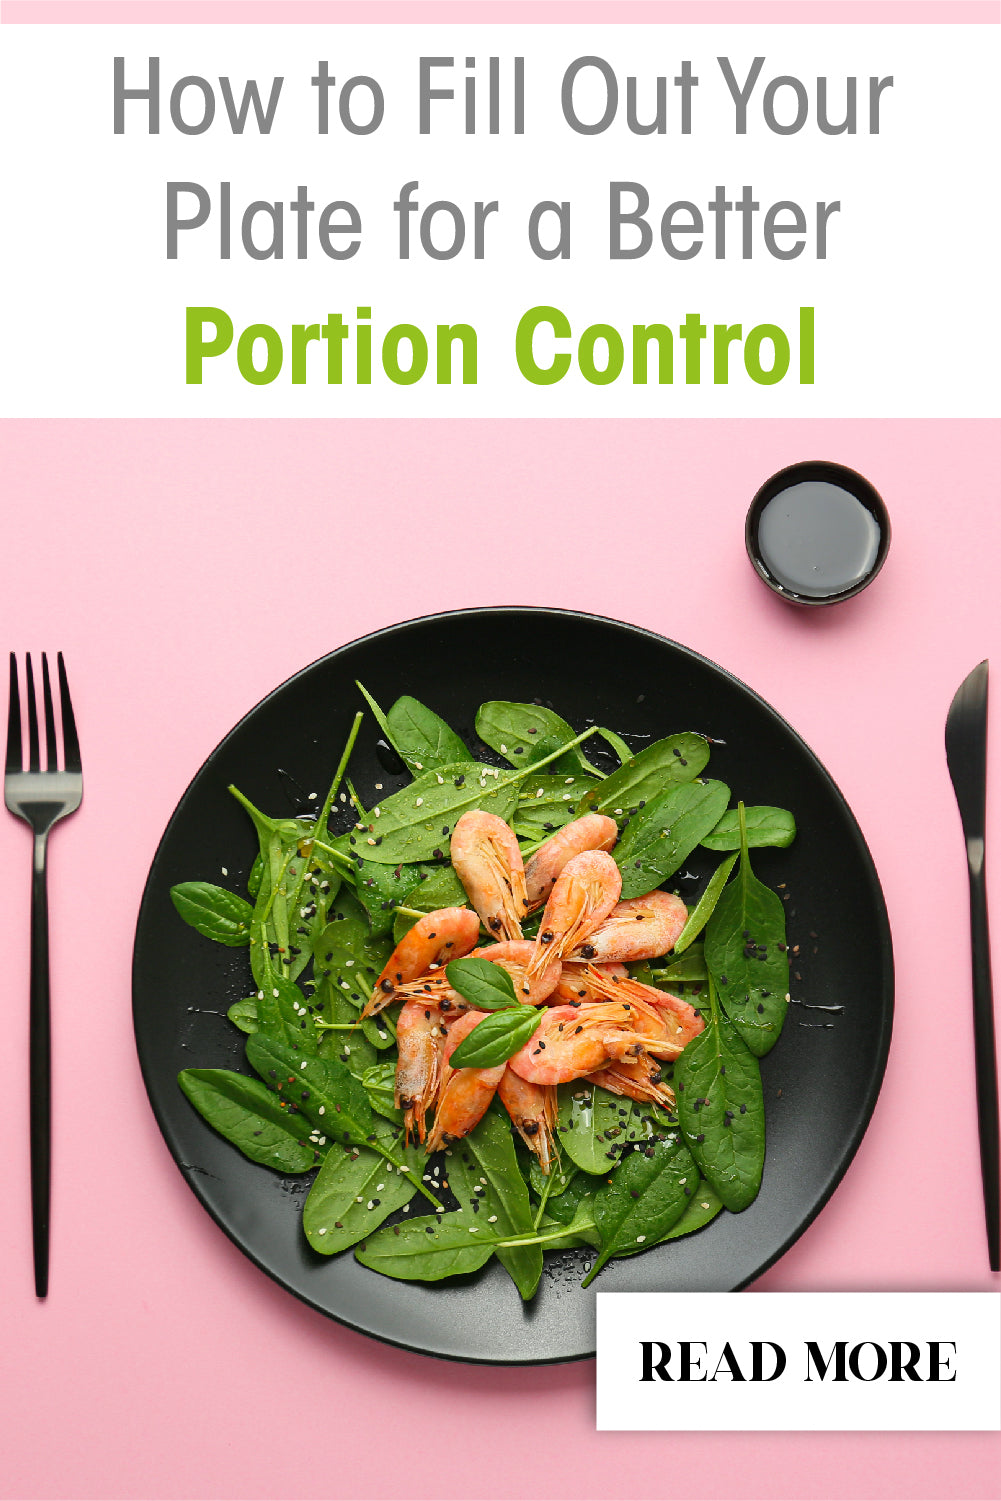 How to Fill Out Your Plate for a Better Portion Control